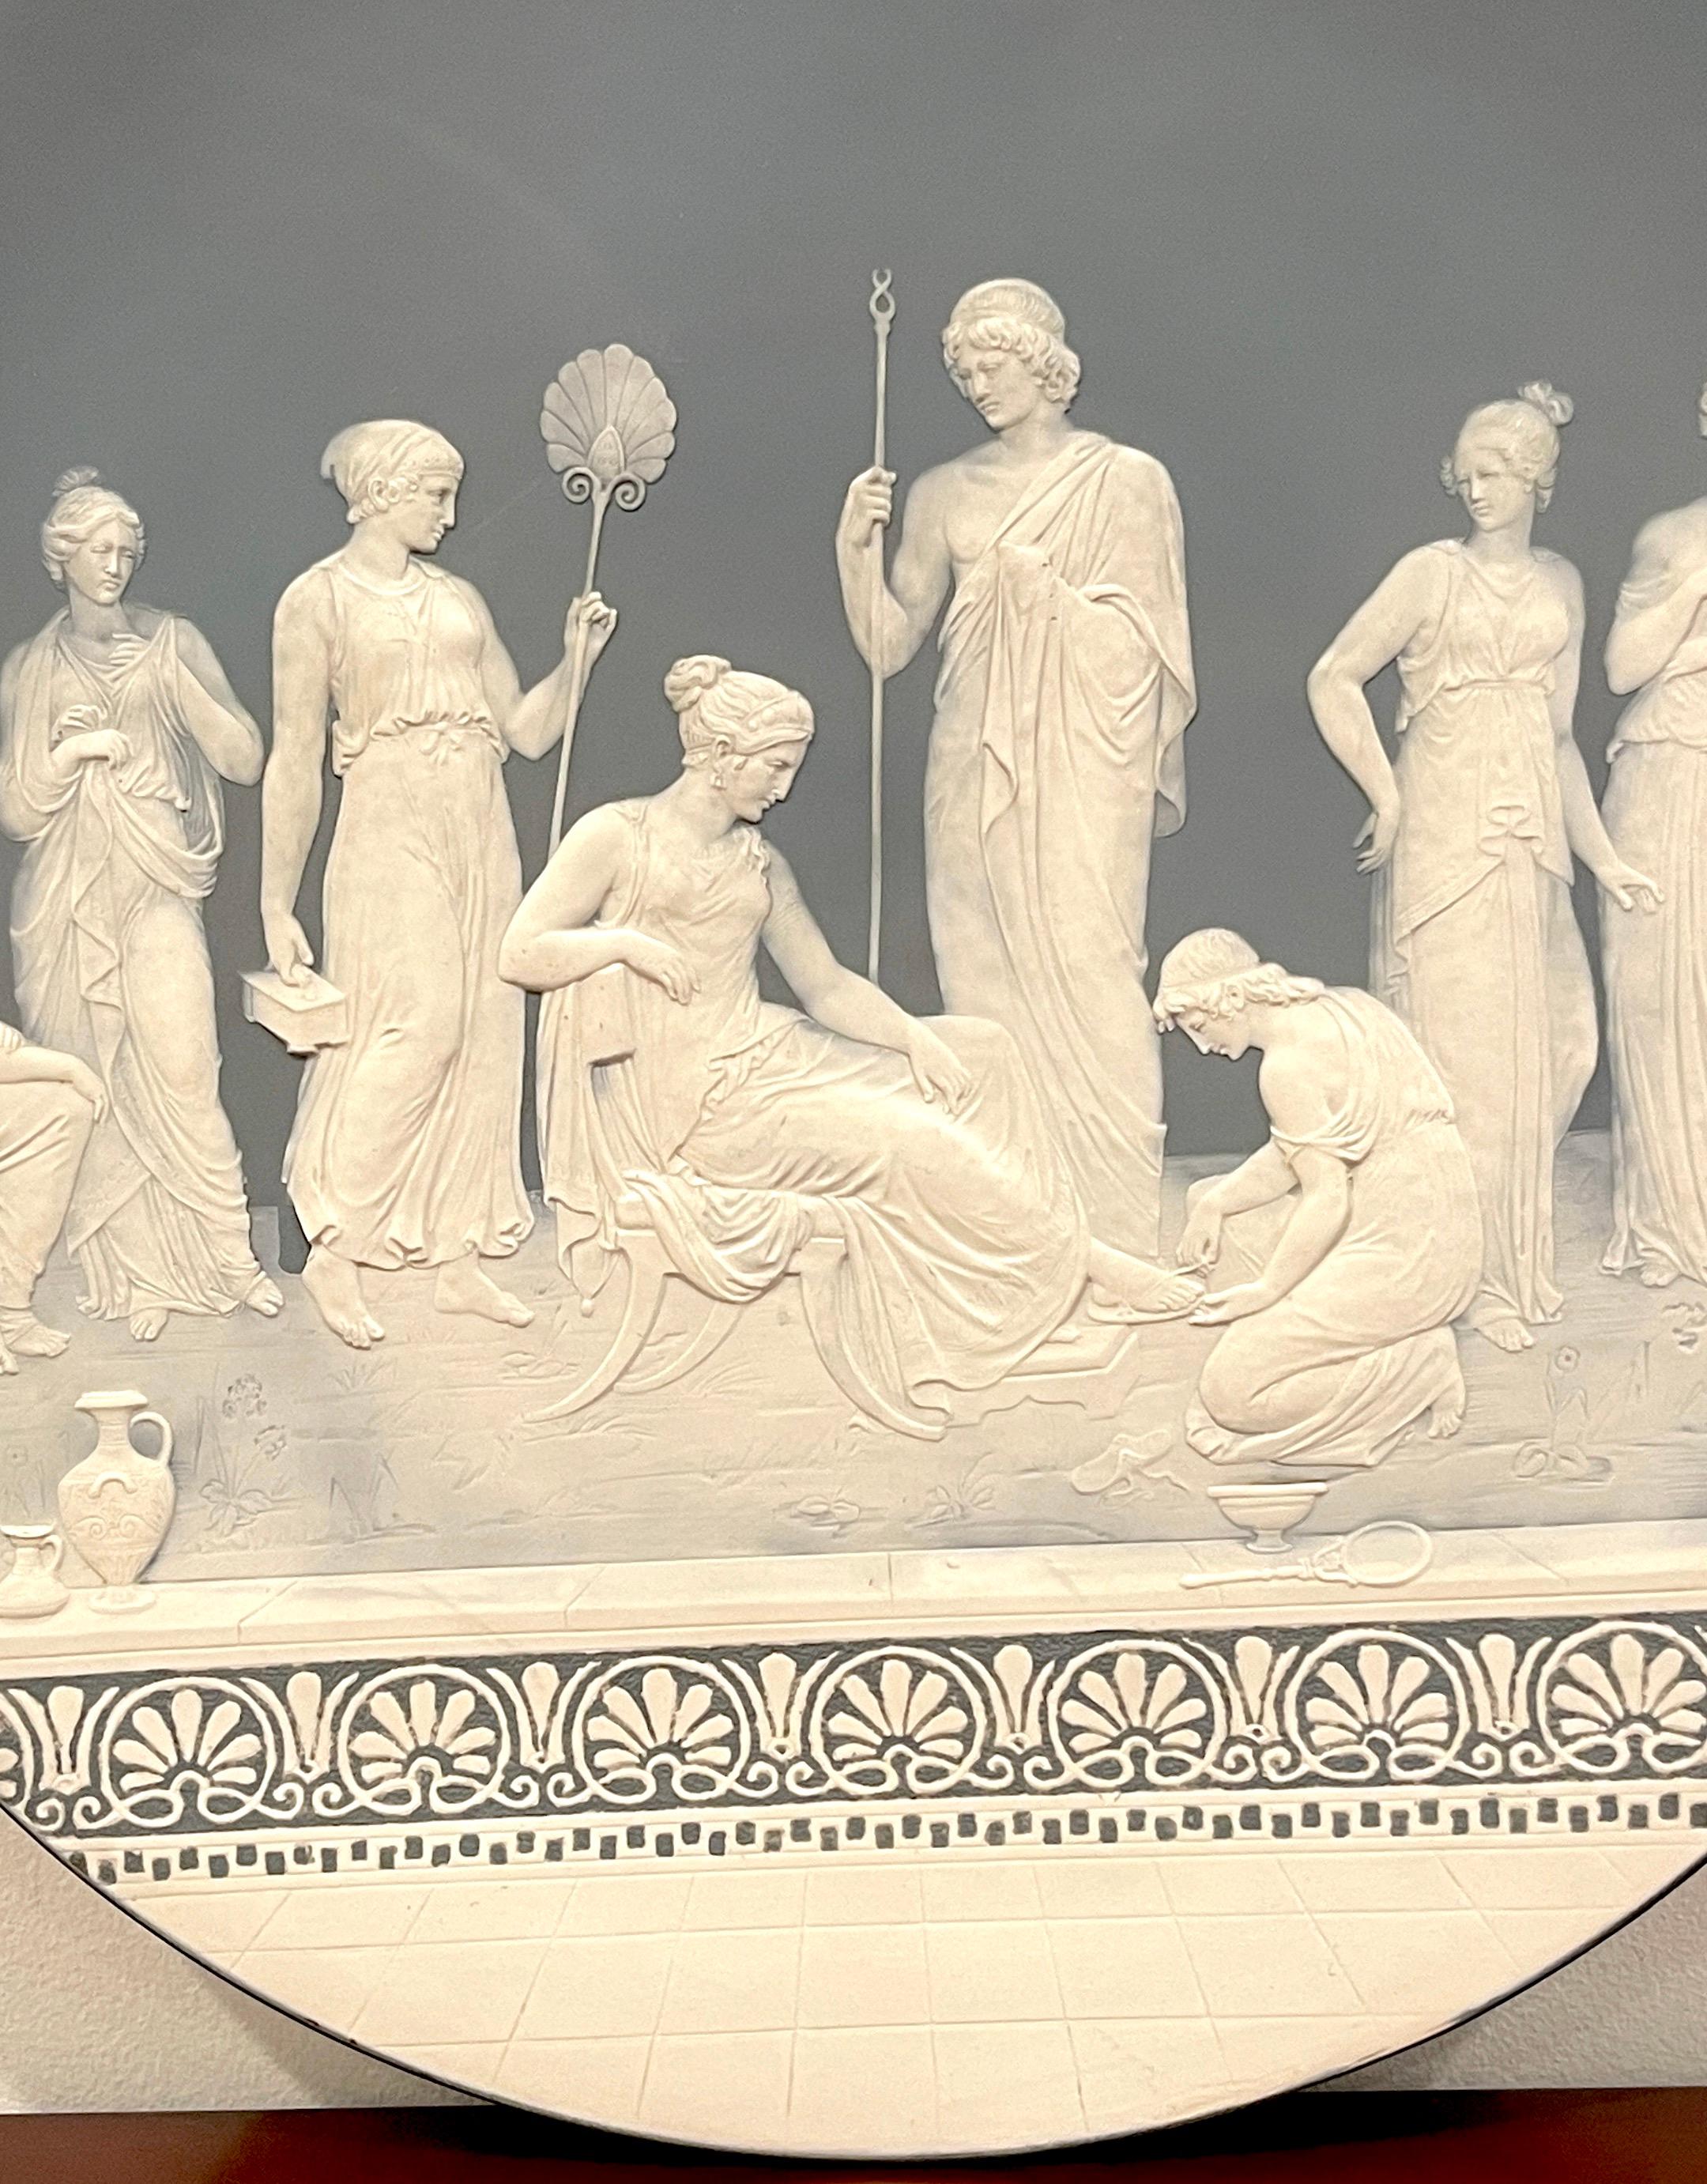 Ceramic Jean Baptist Stahl Pate-sur-pate / Phanolith Neoclassical Court Scene Charger For Sale